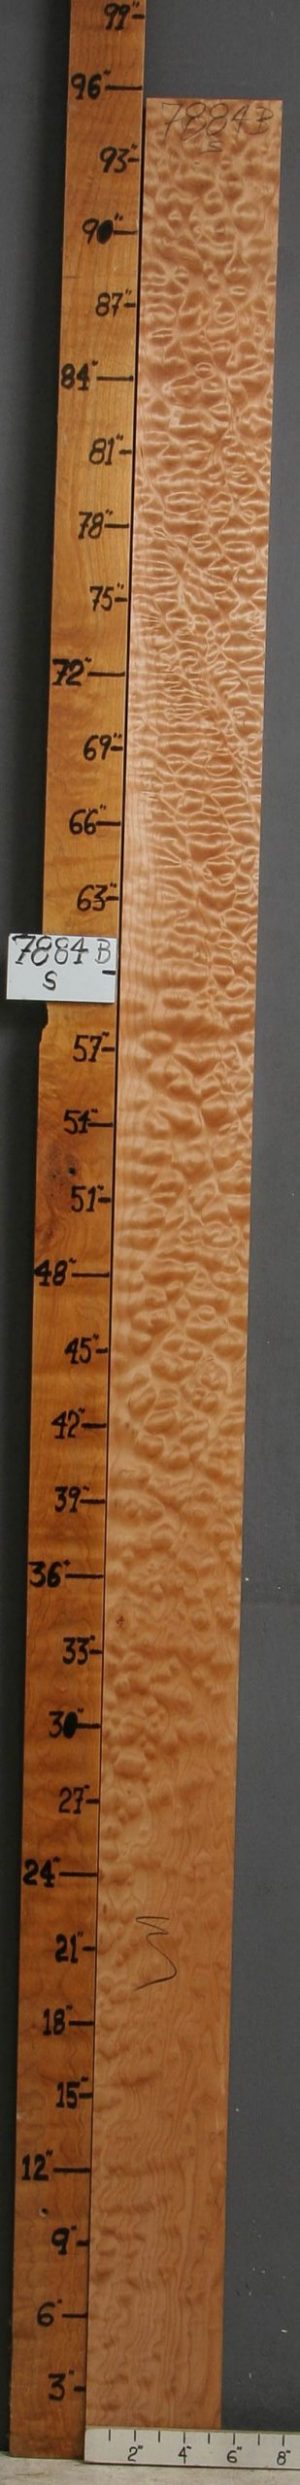 MUSICAL QUILTED MAPLE LUMBER 5"3/8 X 95" X 5/4 (NWT-7884B)